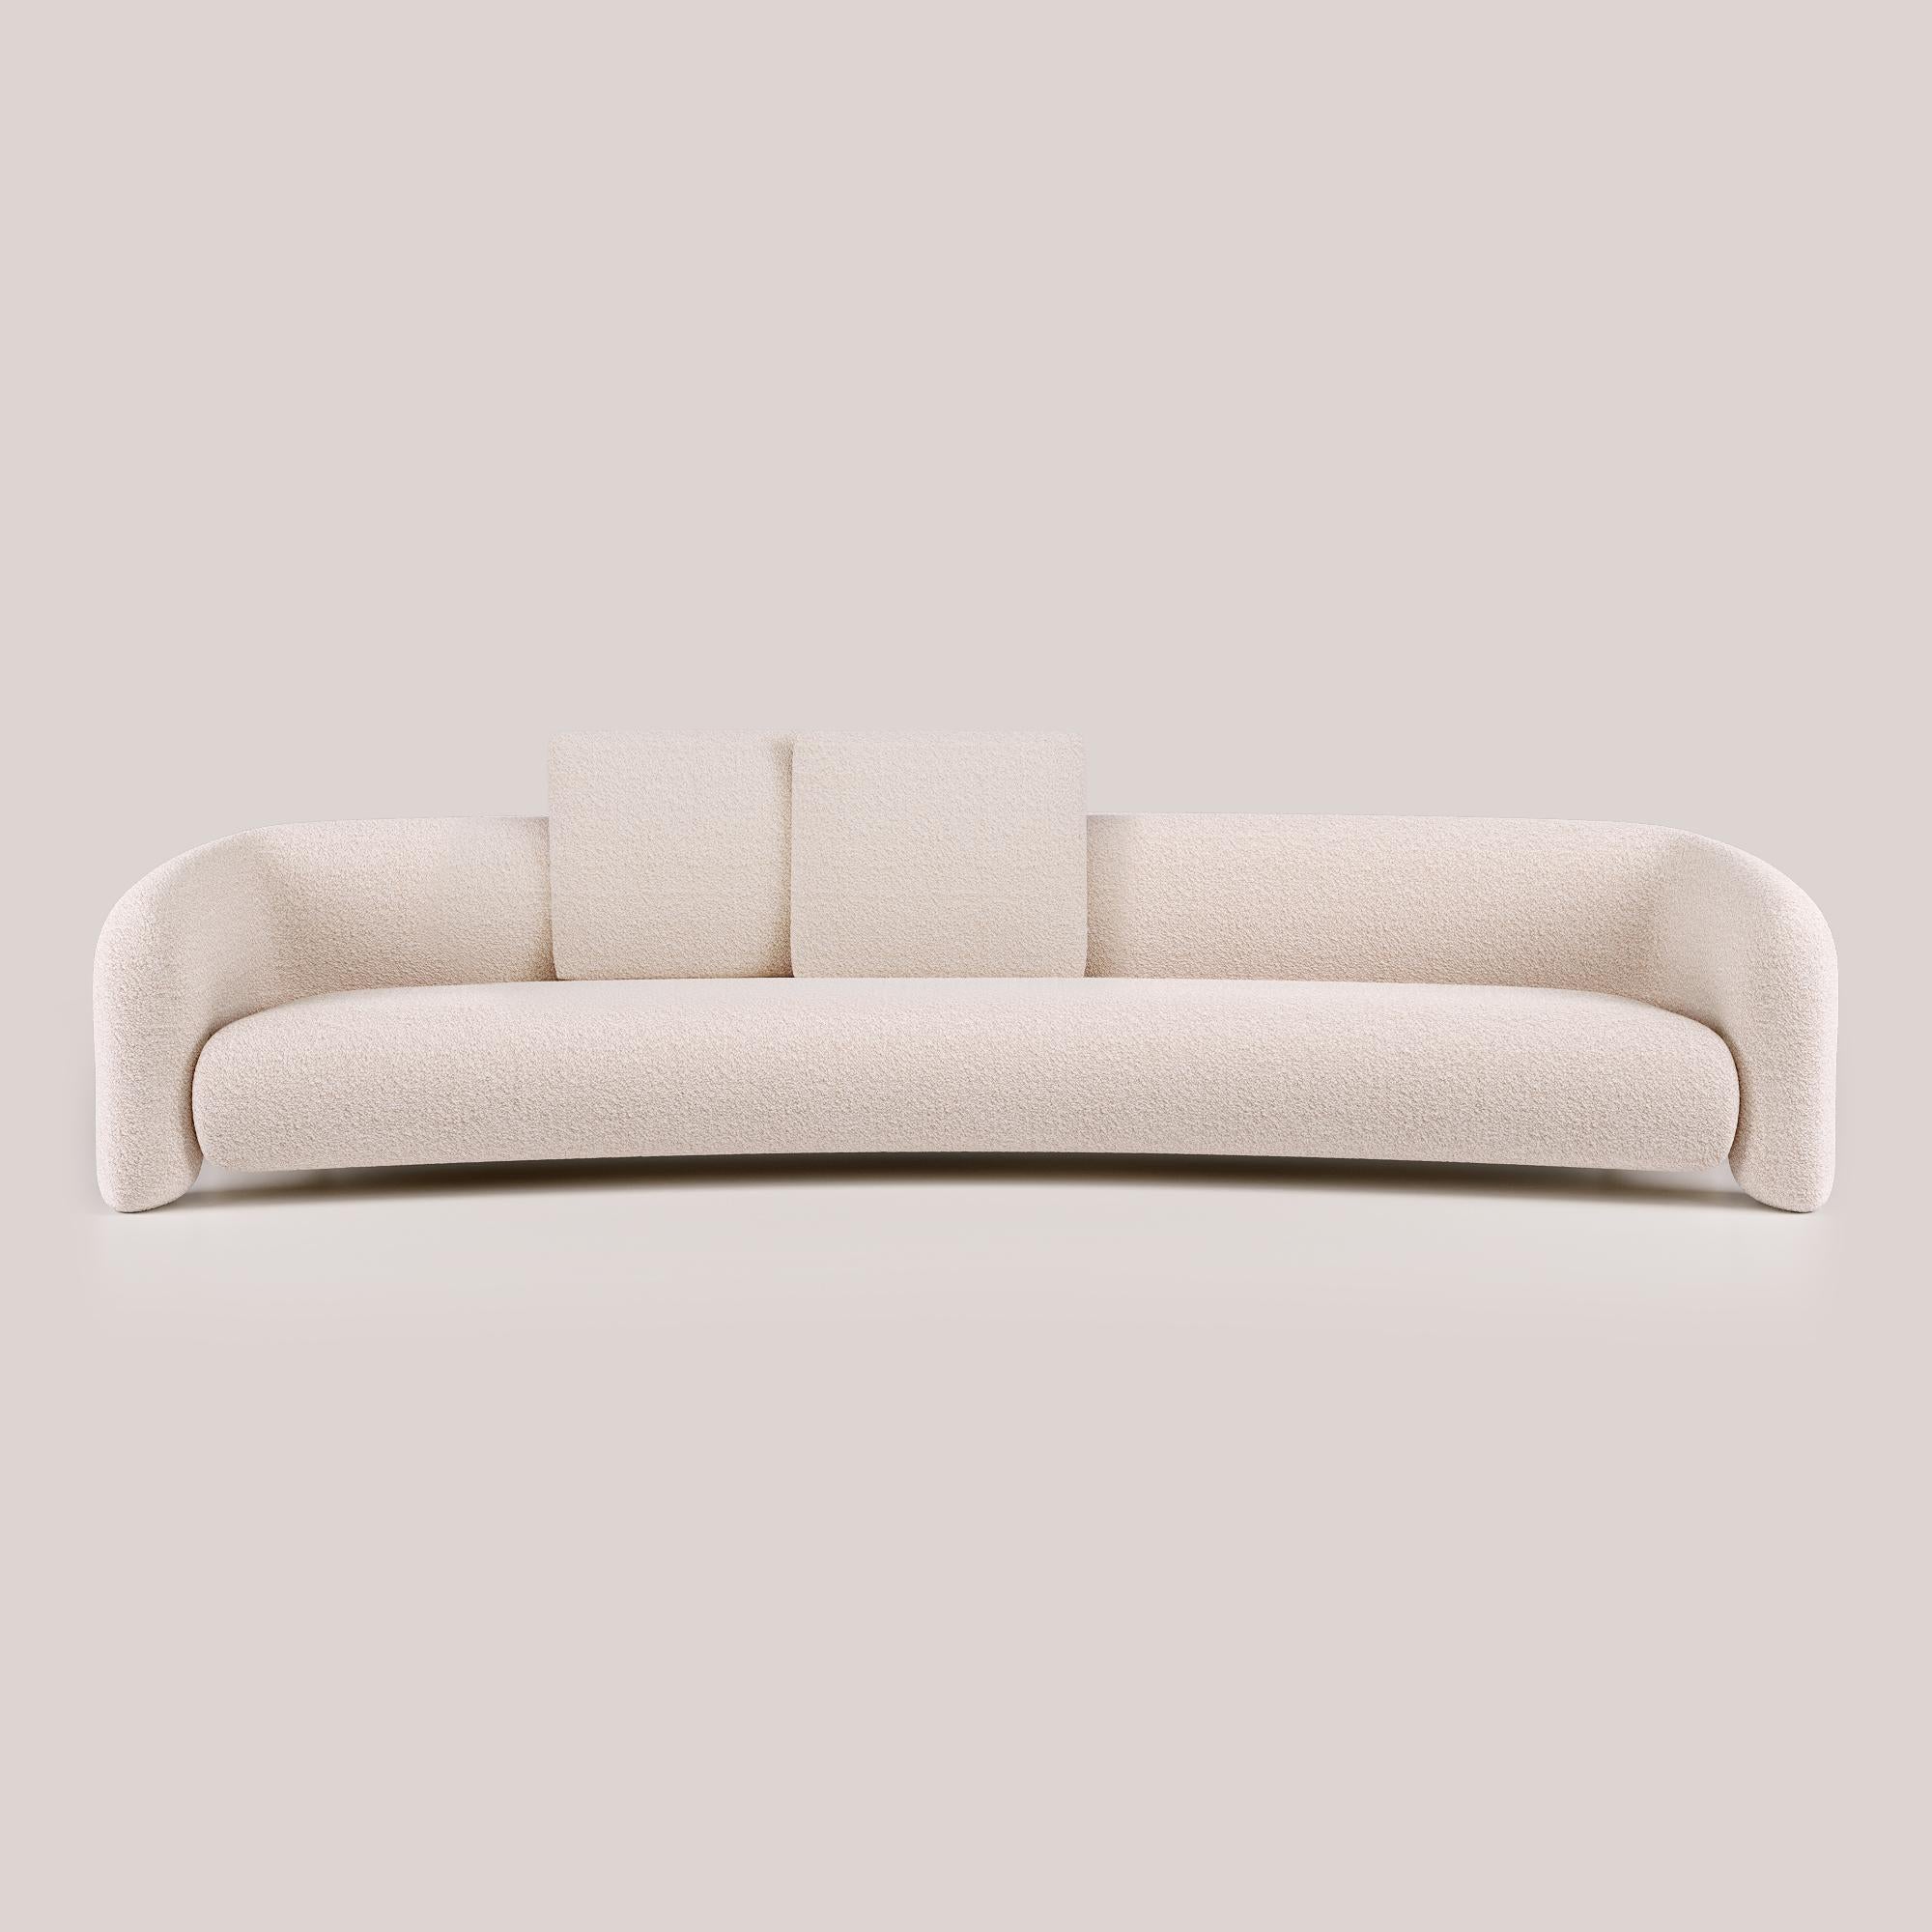 With its contemporary design, this version of the Bold Sofa Curved introduces new dimensions of comfort, offering expanded space for ultimate relaxation. The fluid lines and organic curves, combined with its open arms feature, further amplify the